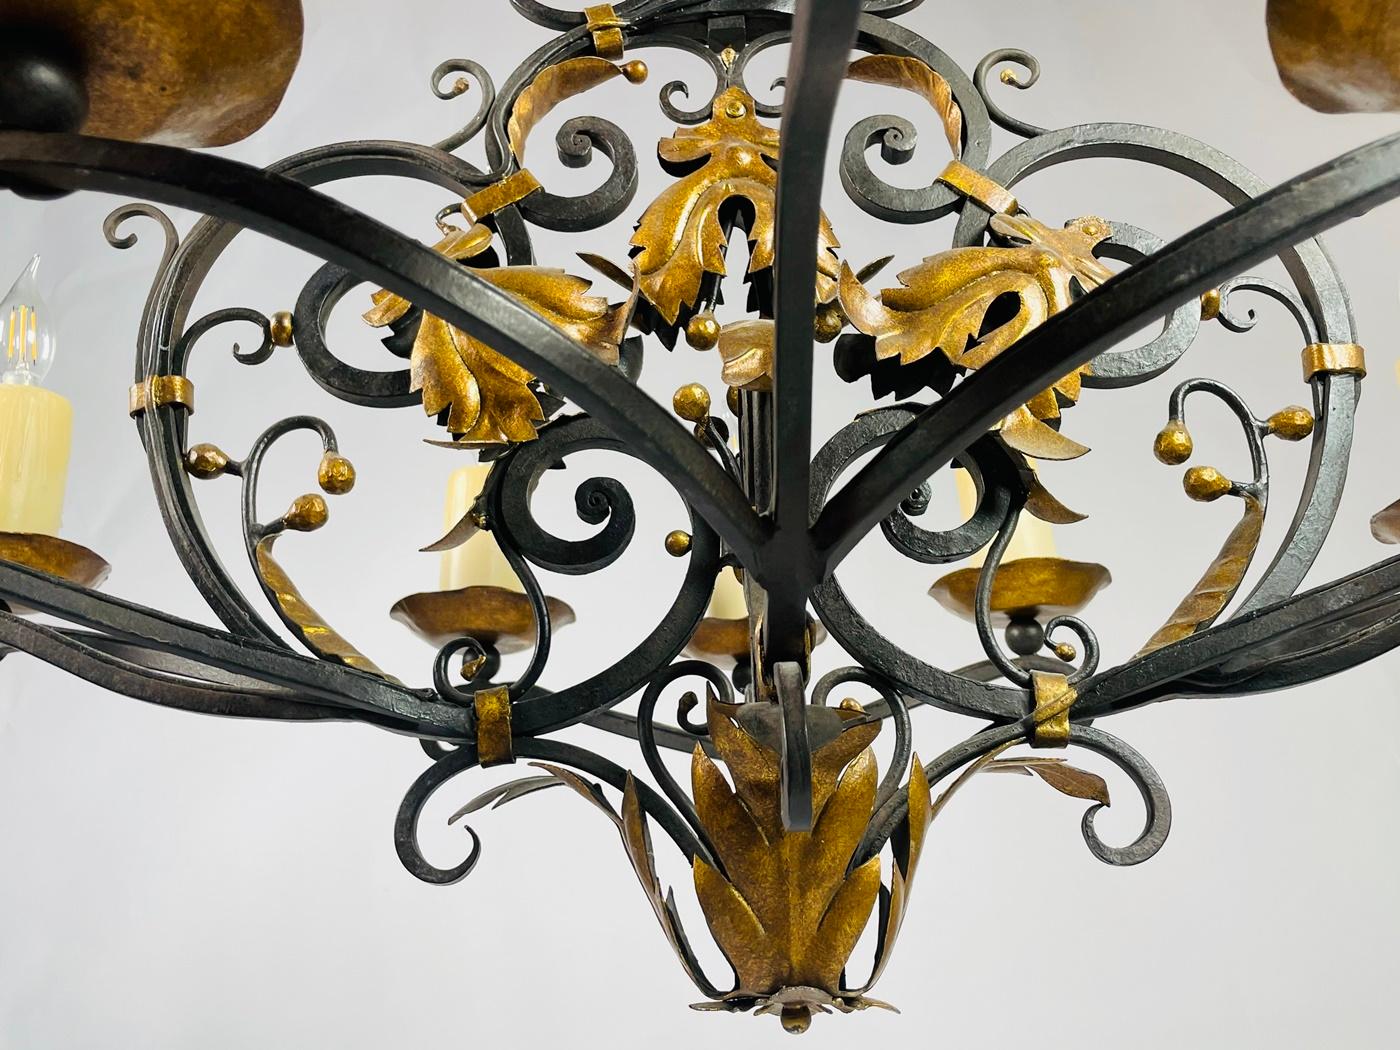 Wrought Iron & Gold Gilt Chandelier by Paul Ferrante, USA 2016 For Sale 1